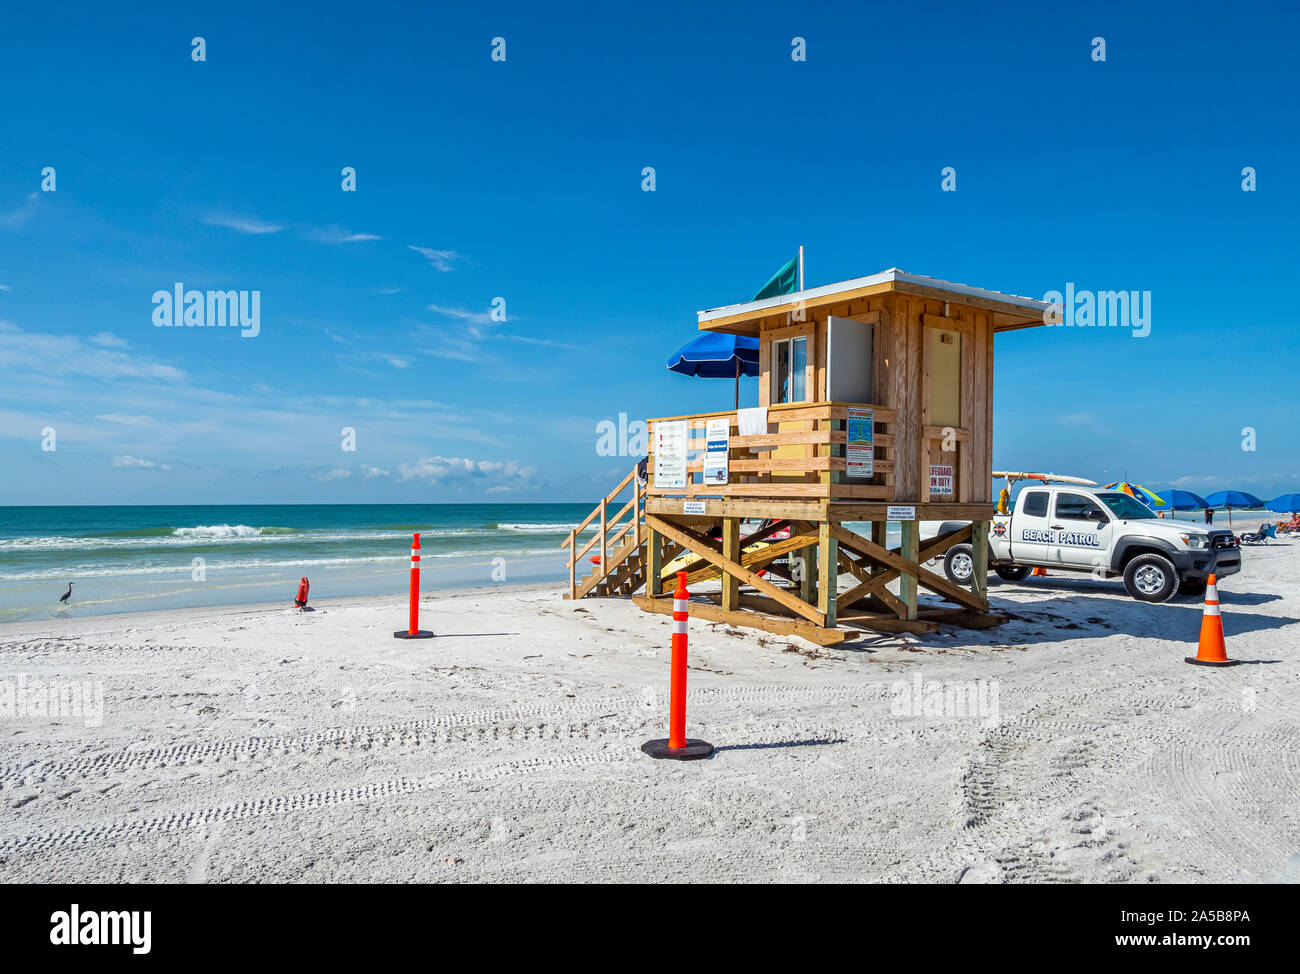 Lifeguard stand on Lido Beach on the Gulf of Mexico on Lido Key in Sarasota Florida in the United States Stock Photo